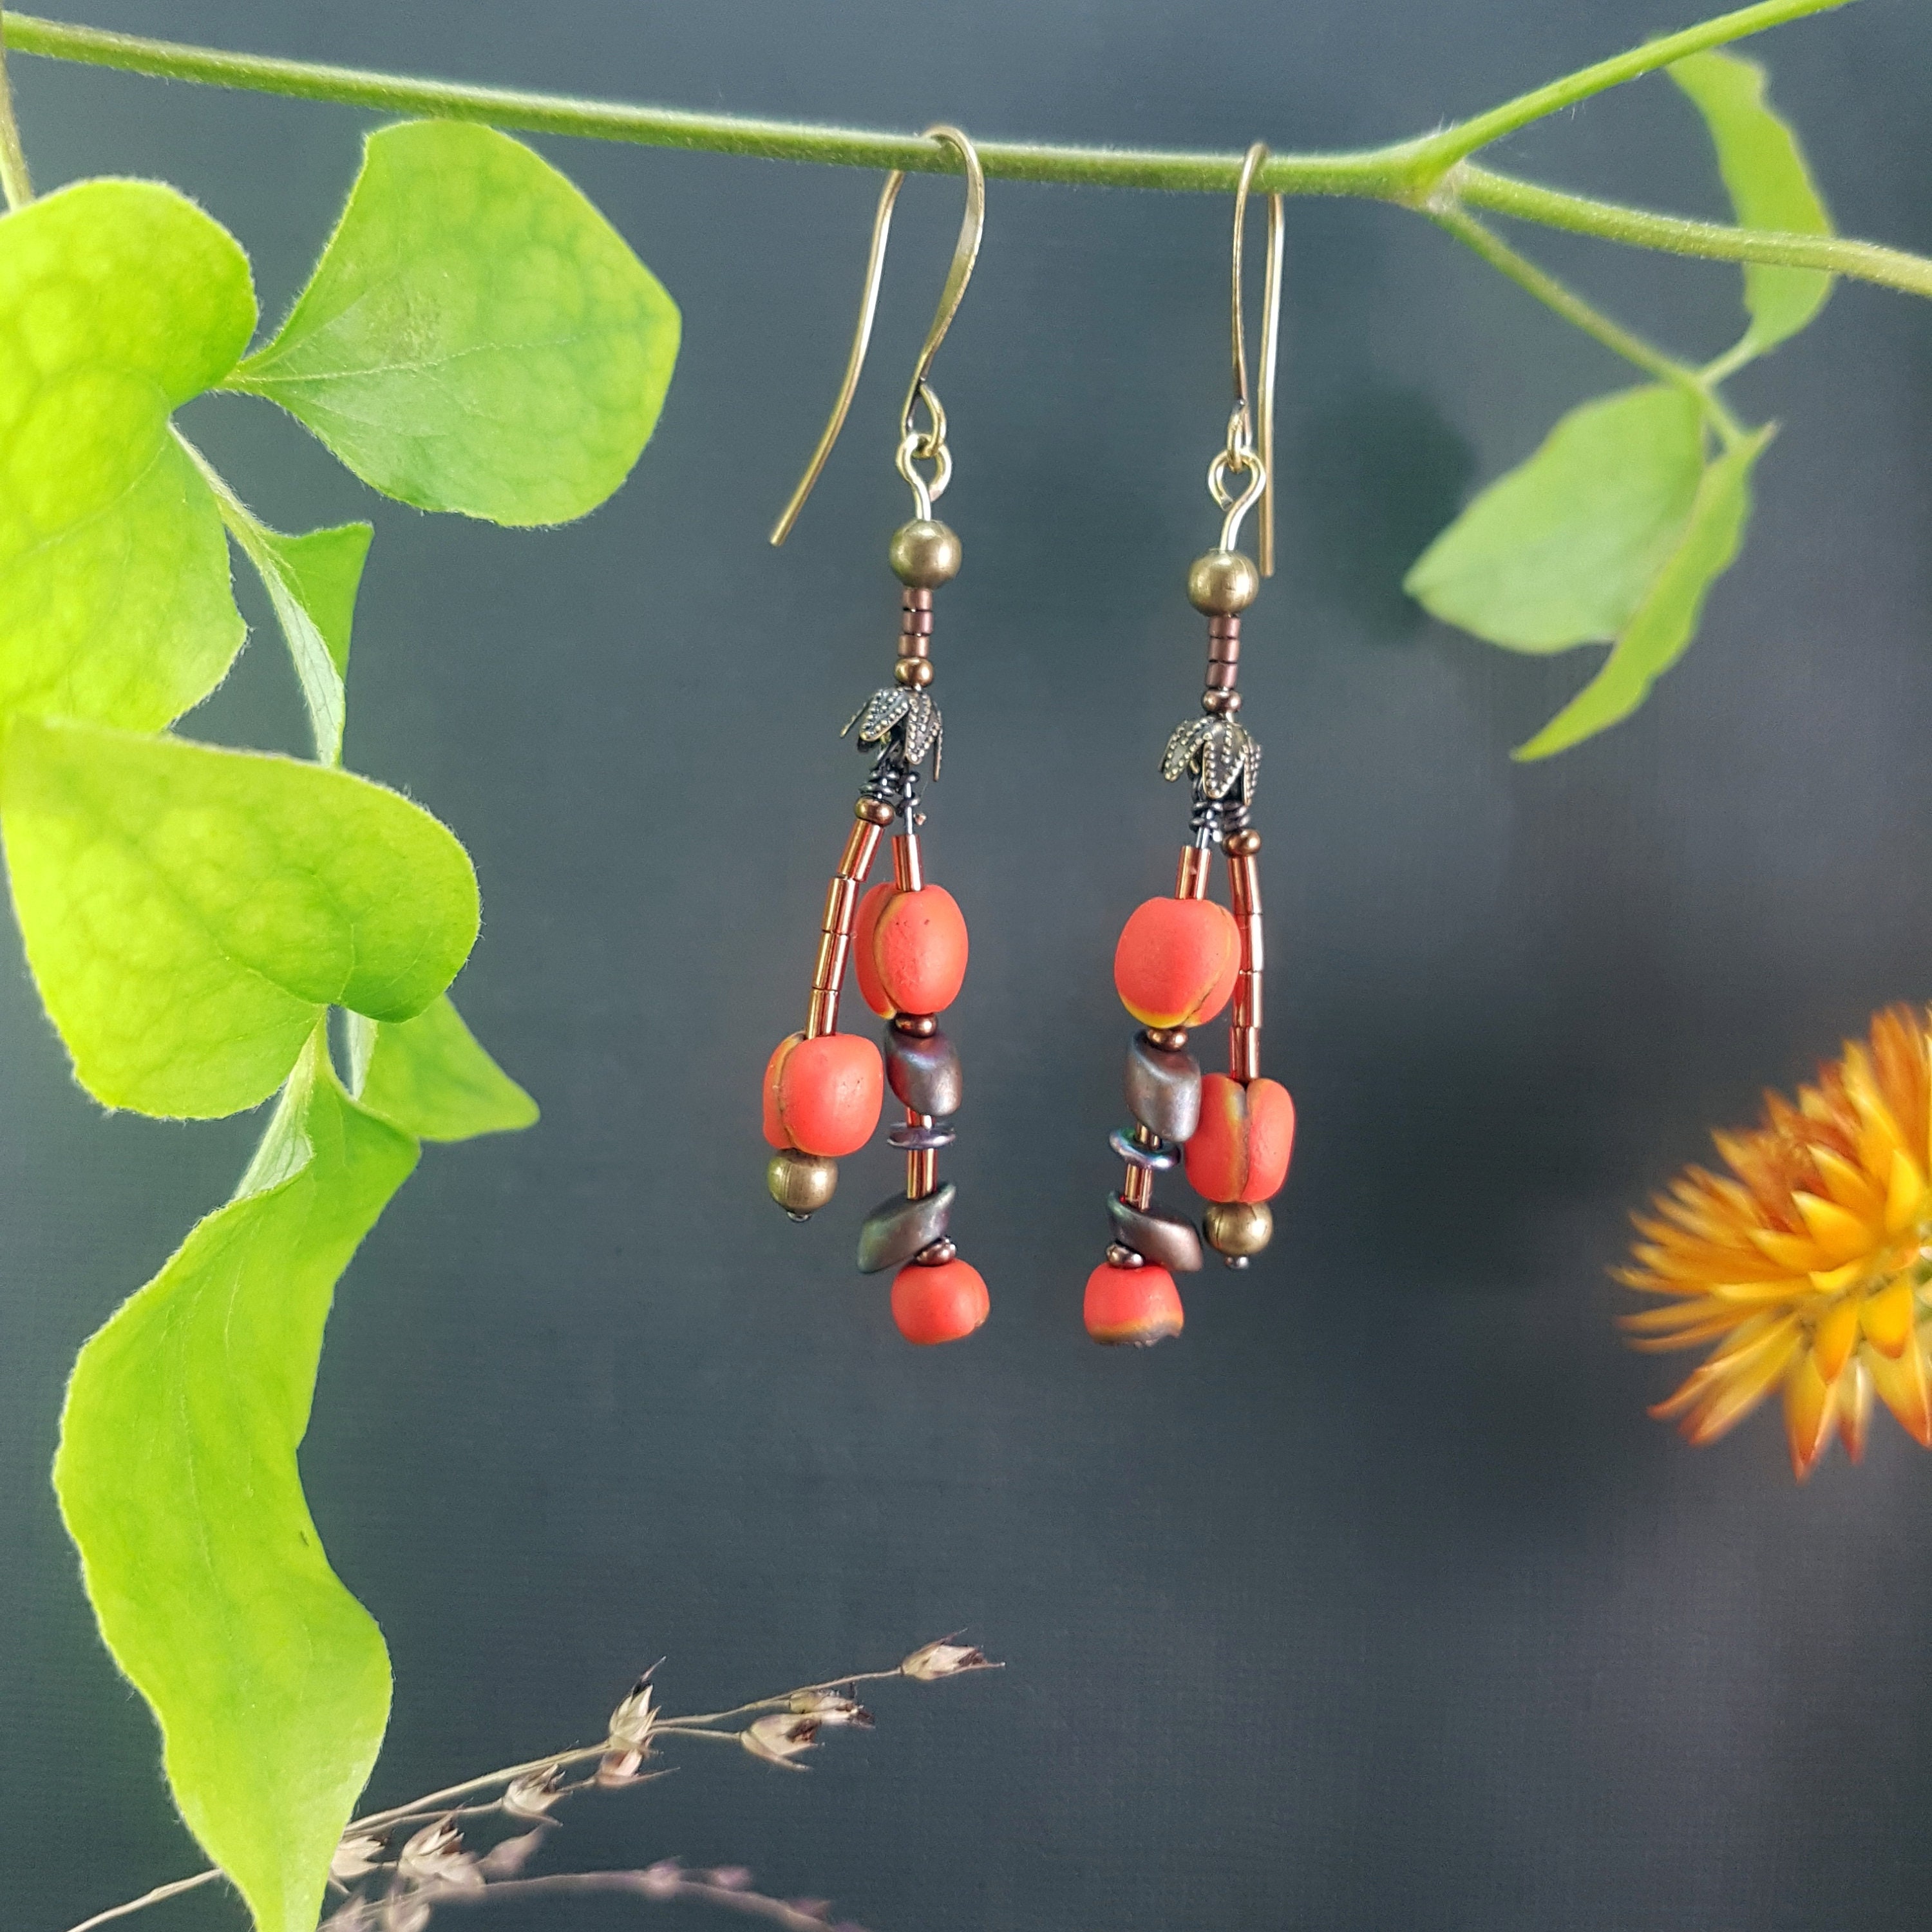 free shipping Christmas gift for special friend Drop earrings for women gift under 30 USD Christmas present flower dangle earrings